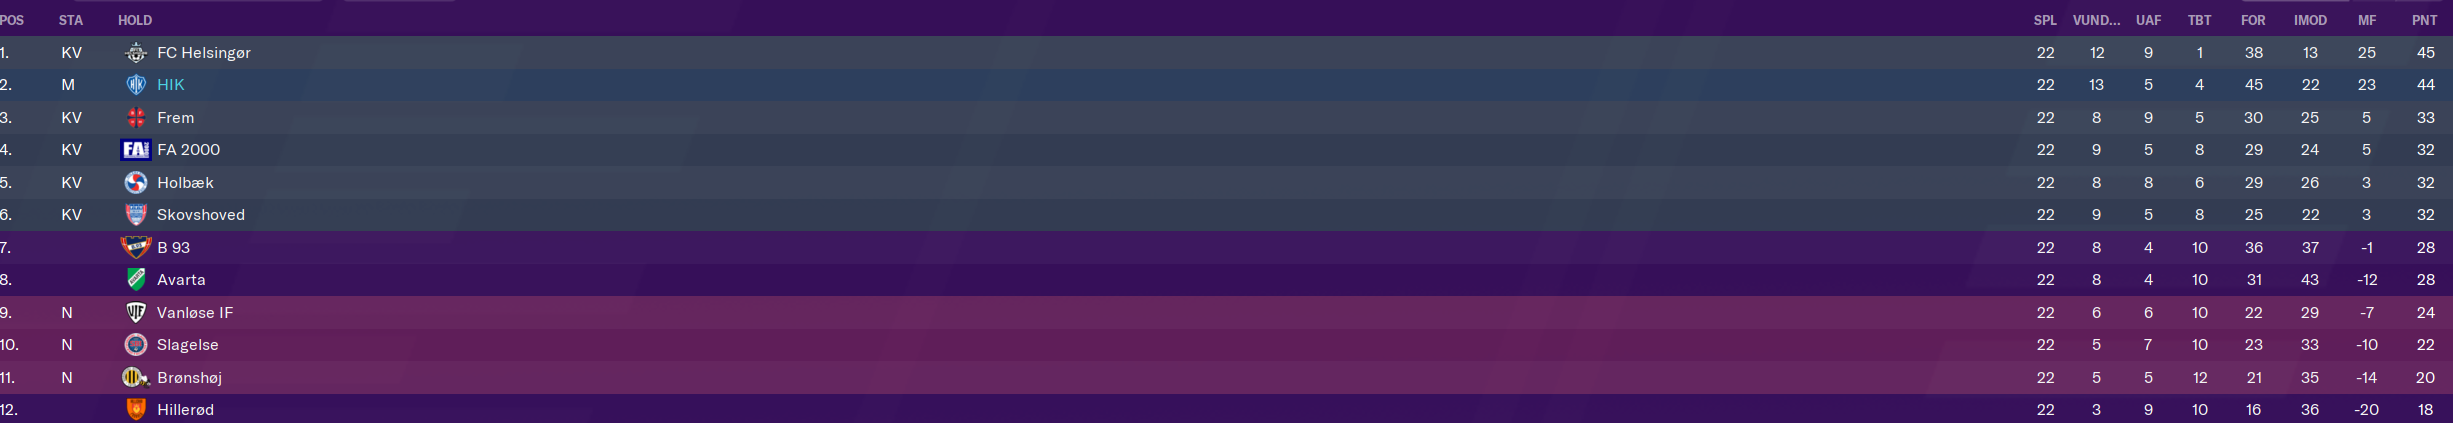 Standing 19-20 indl.png